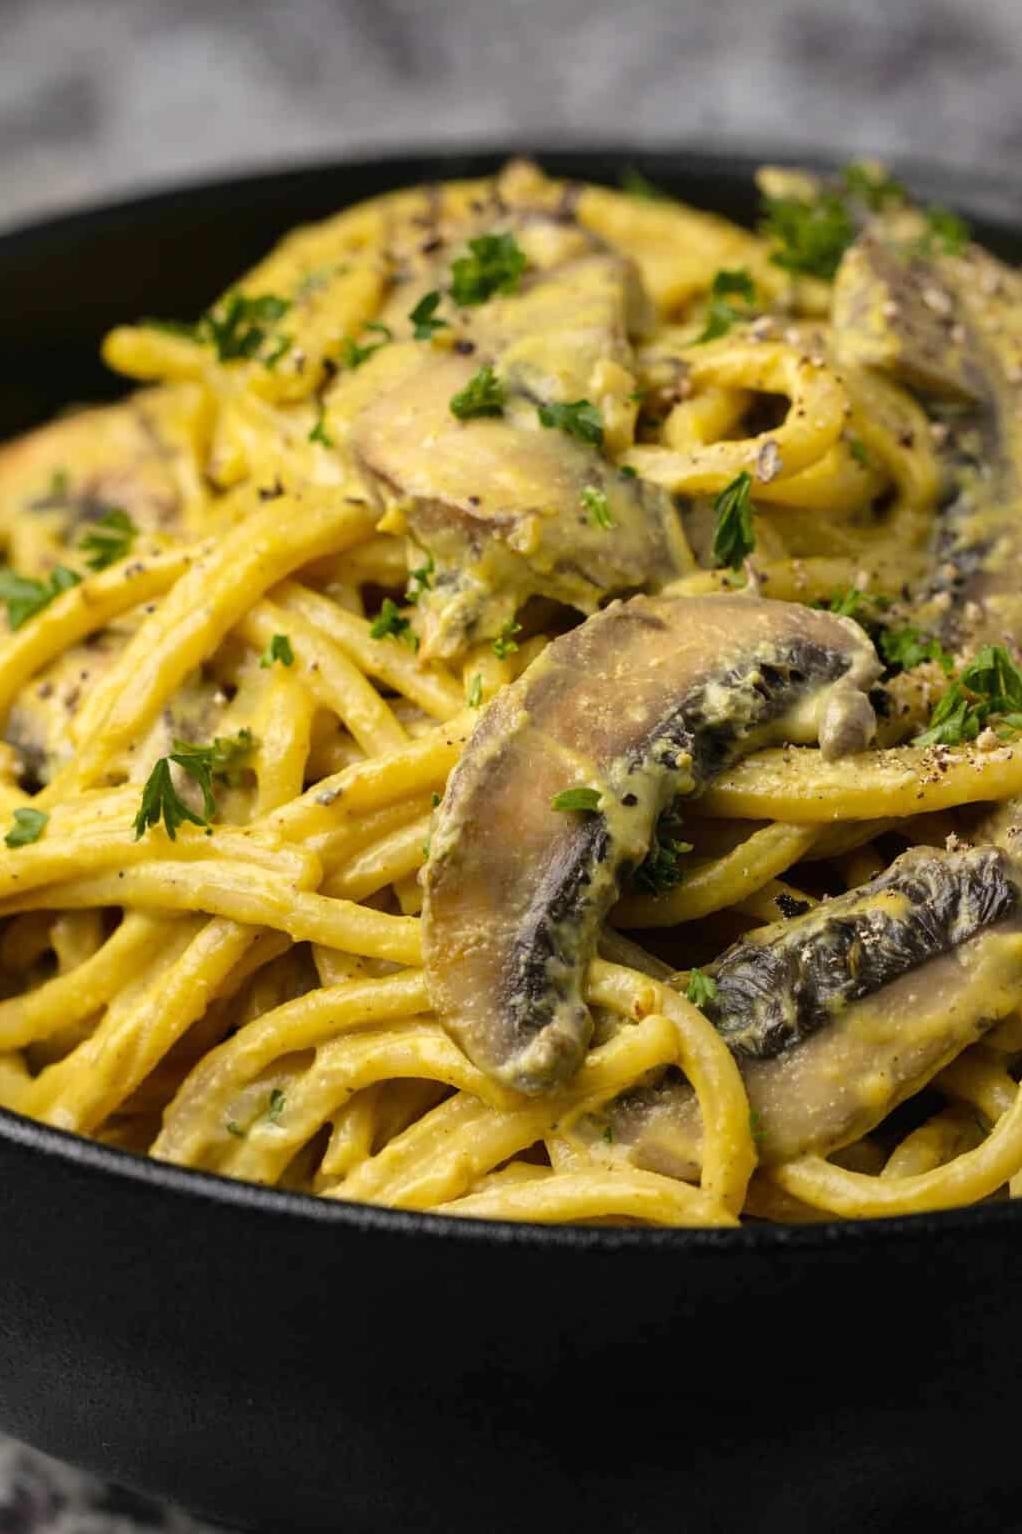  You won't even miss the eggs and bacon in this vegan version of carbonara.